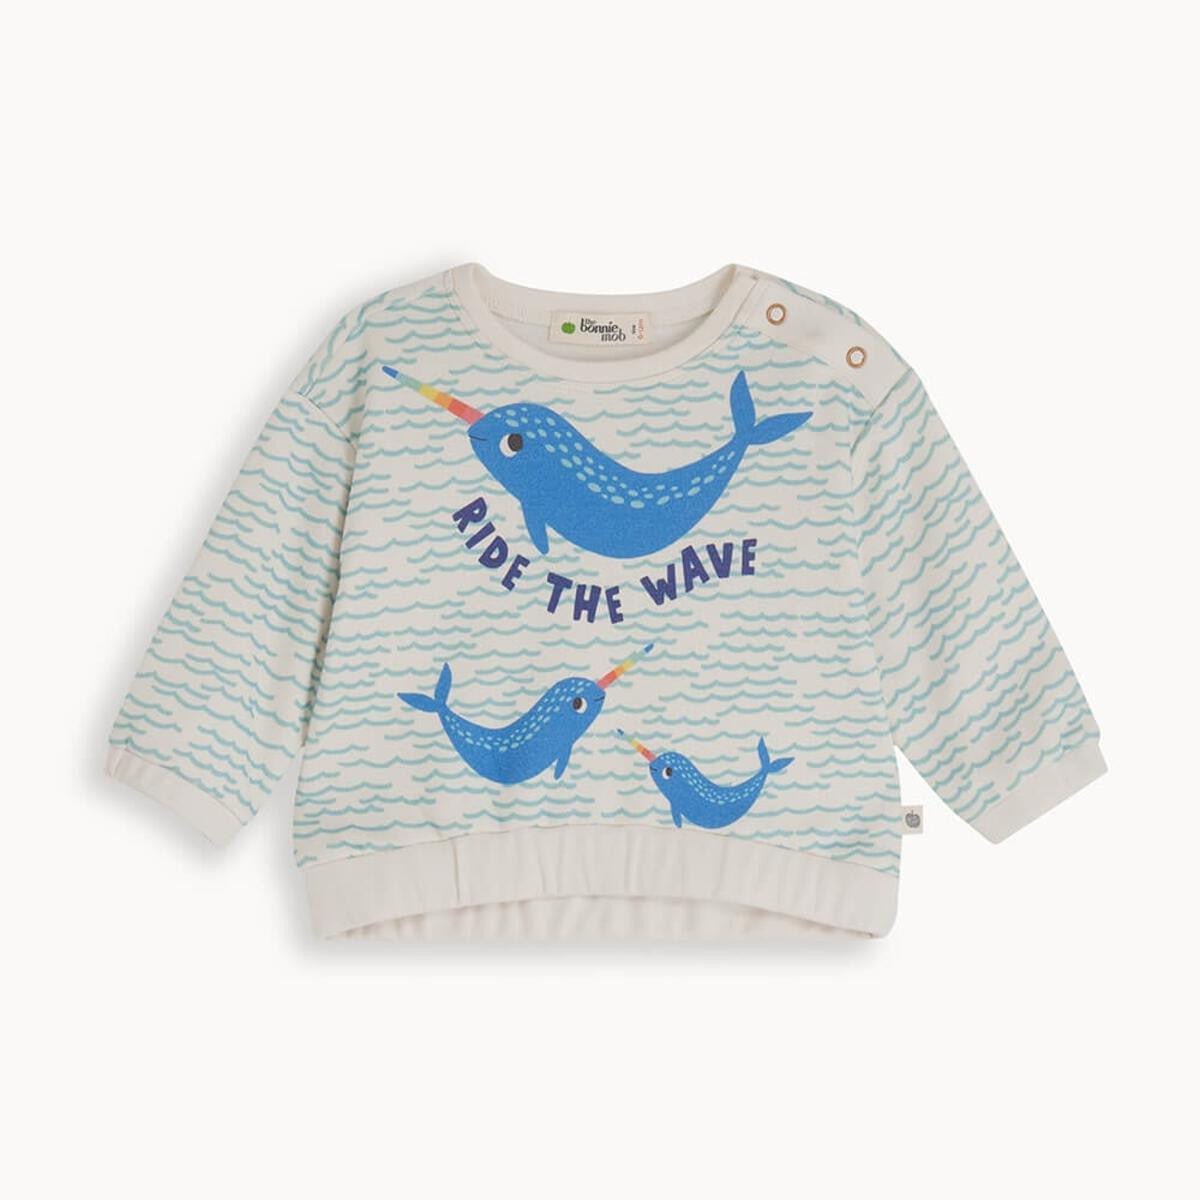 The Bonnie Mob Top - Narwhal (3041-221)